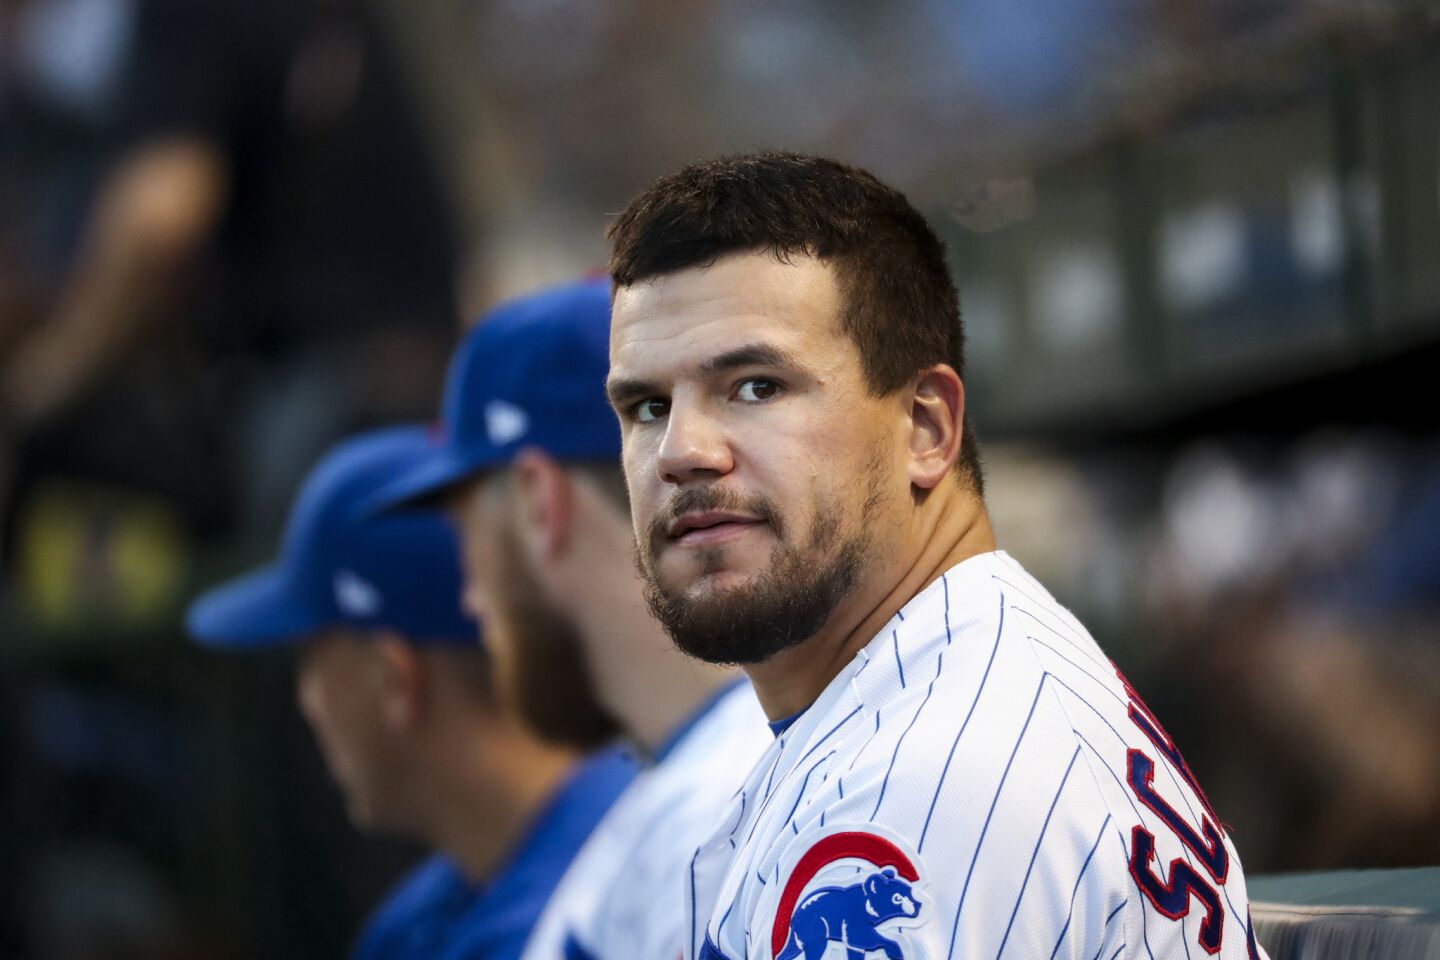 Schwarber, originally a catcher and now an outfielder, was the fourth overall pick out of Indiana. He made his big-league debut in 2015 and other than a brief minor-league stint in 2017, has been in the majors ever since.